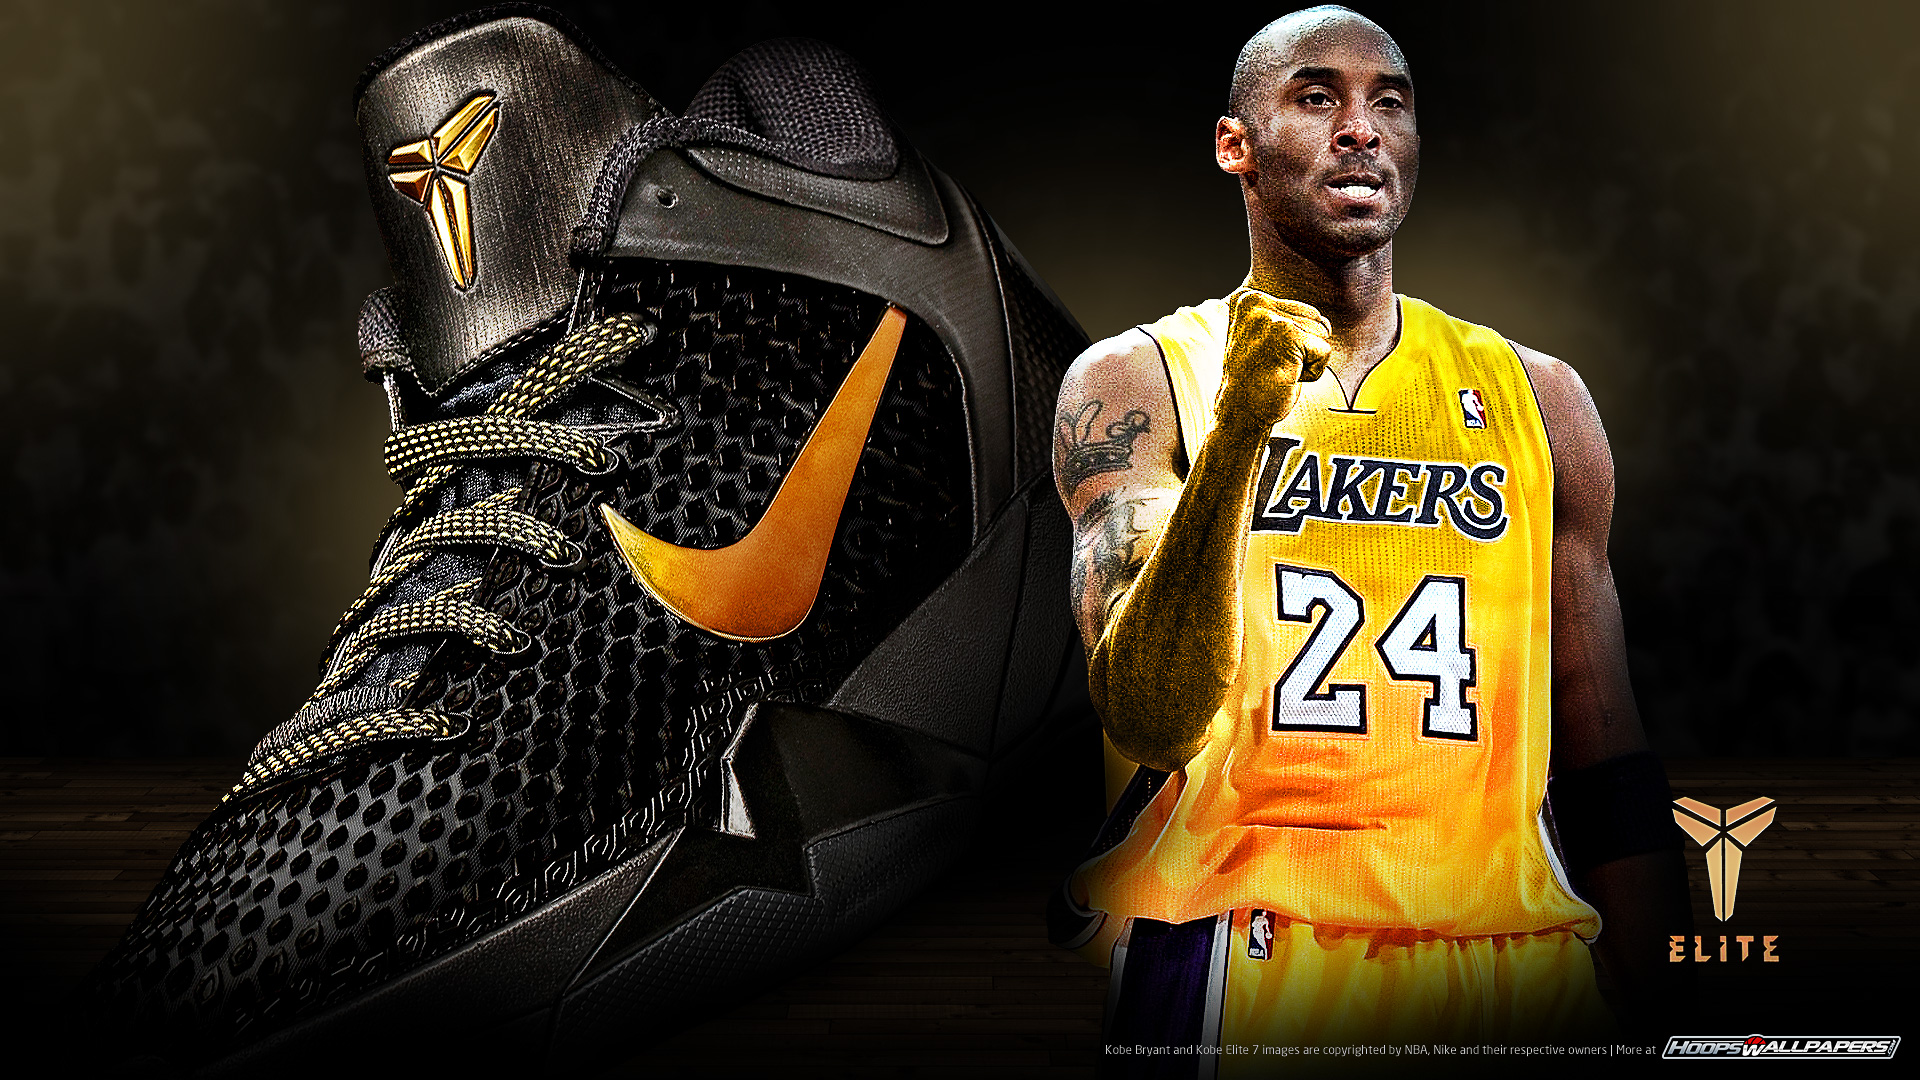 HoopsWallpapers.com – Get the latest HD and mobile NBA wallpapers today! » Kobe Bryant